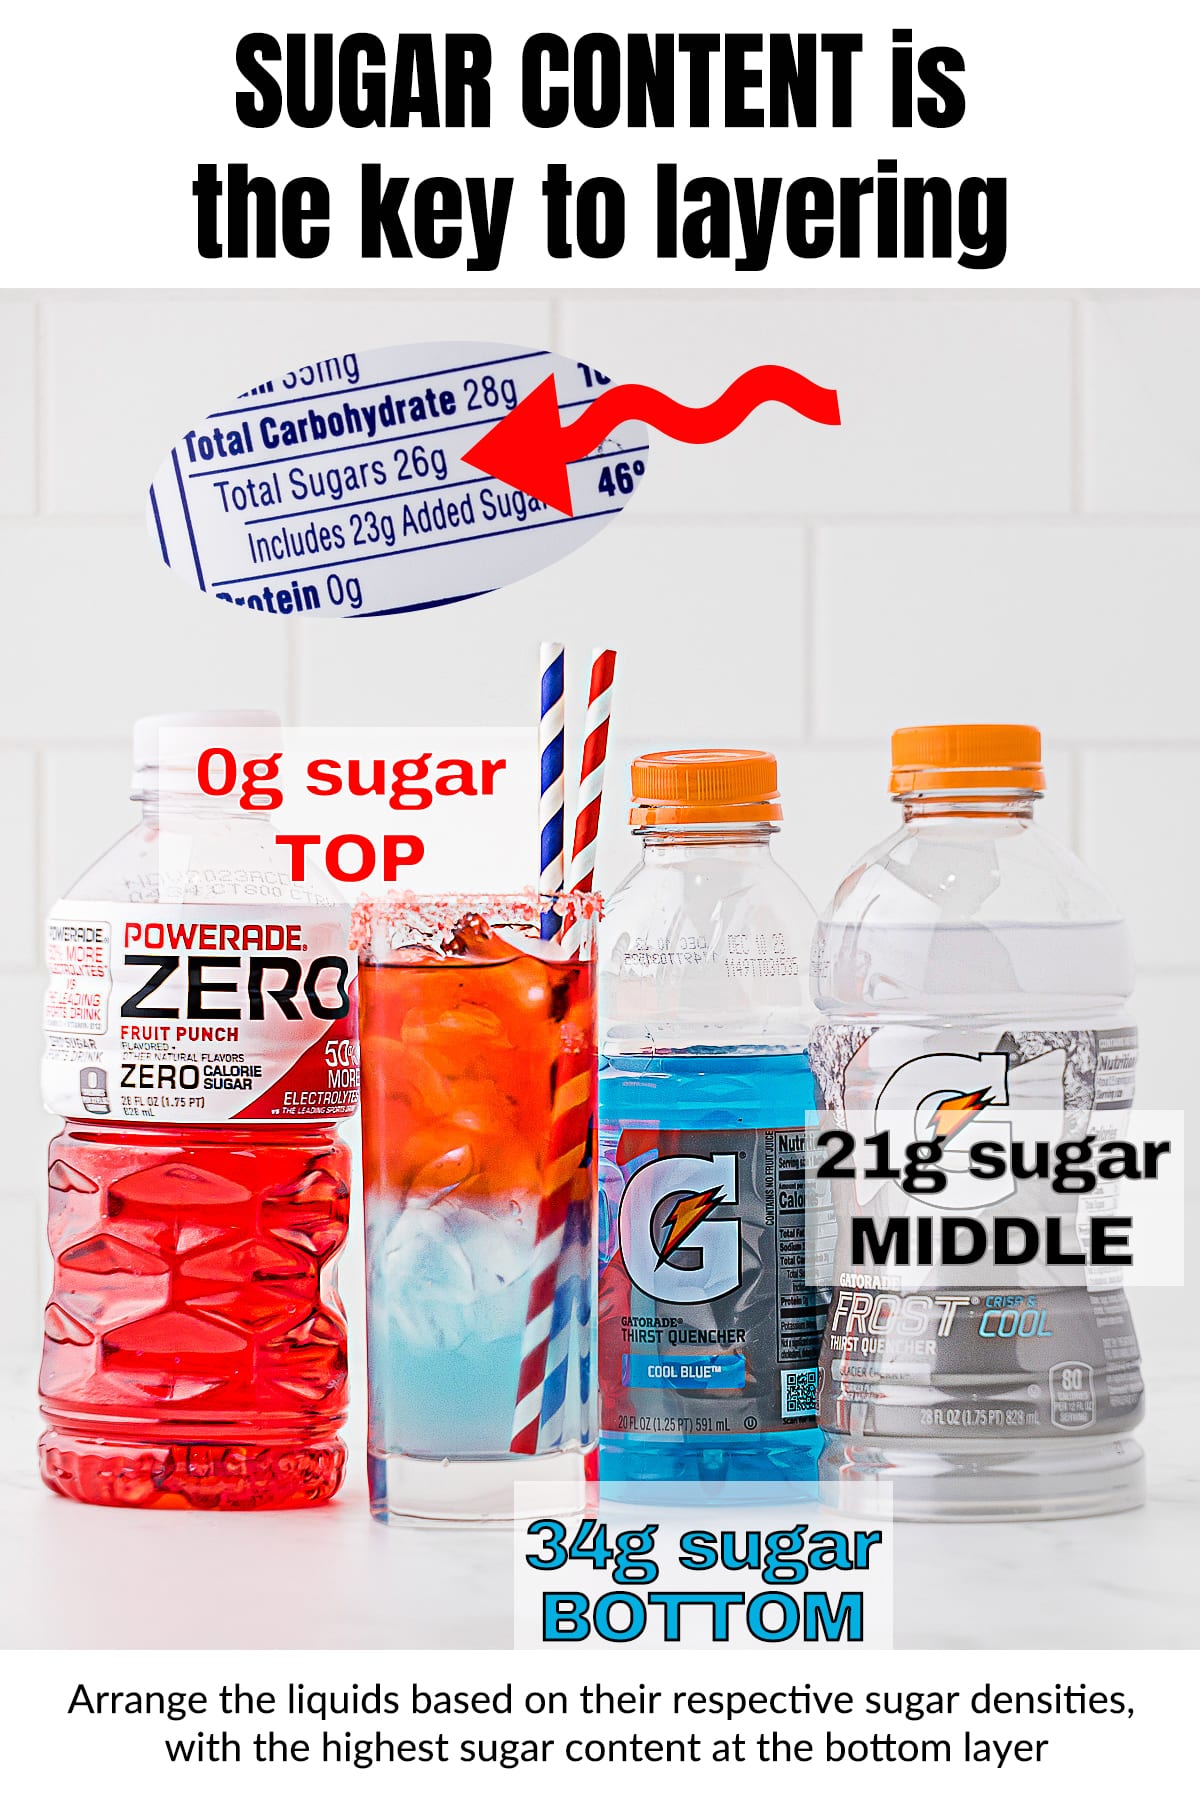 Red white and blue layered drink from top to bottom in square glass with two straws with spiral design. Drink ingredients pictured include red powerade, white gatorade and blue gatorade. Writing on the image is, "Sugar content is the key to layering. Arrange the liquids based on their respective sugar densities, with the highest sugar content at the bottom layer."